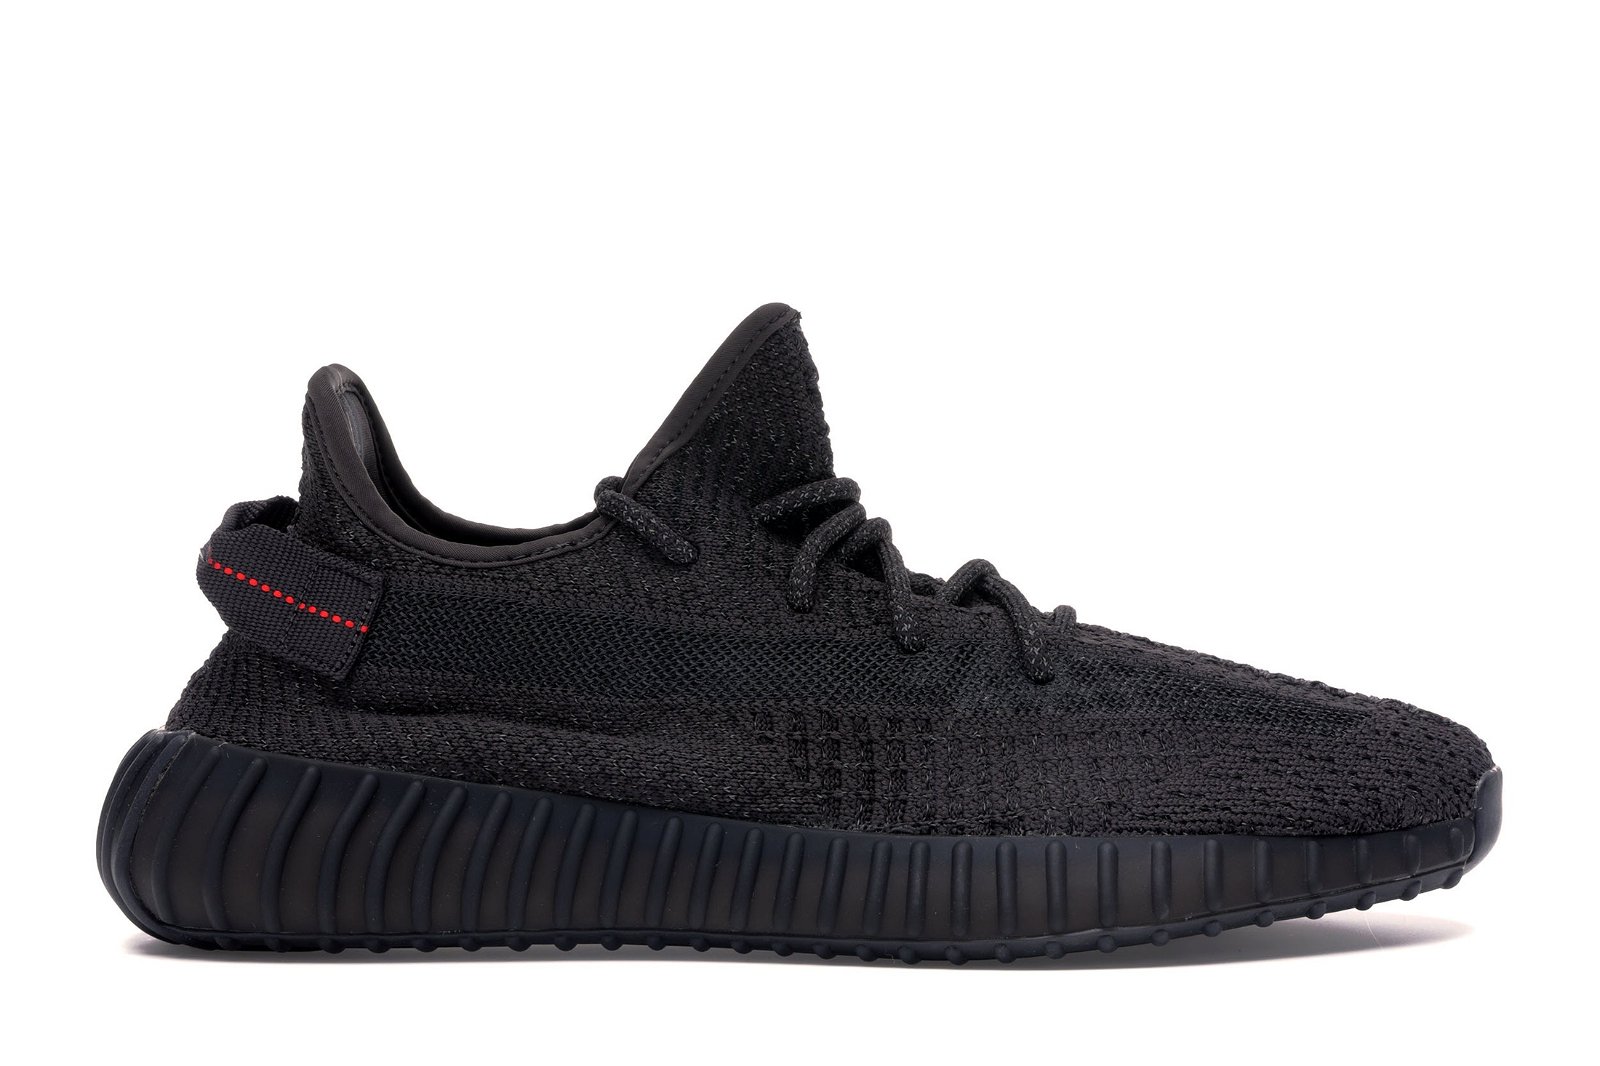 adidas Yeezy Boost 350 V2 Static Black (Reflective) sneakers